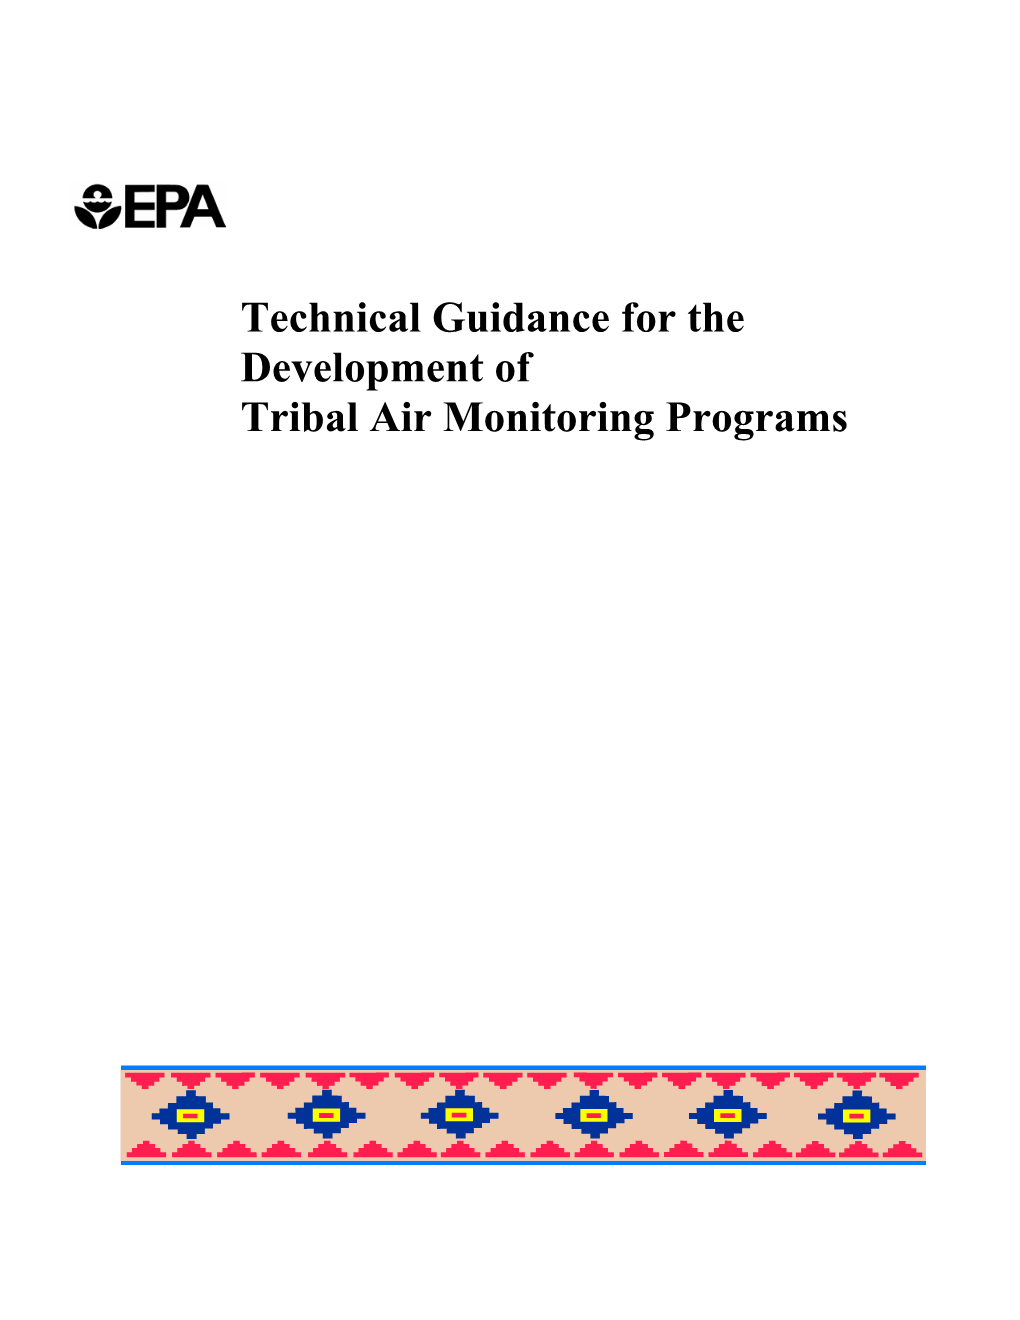 Technical Guidance for the Development of Tribal Air Monitoring Programs